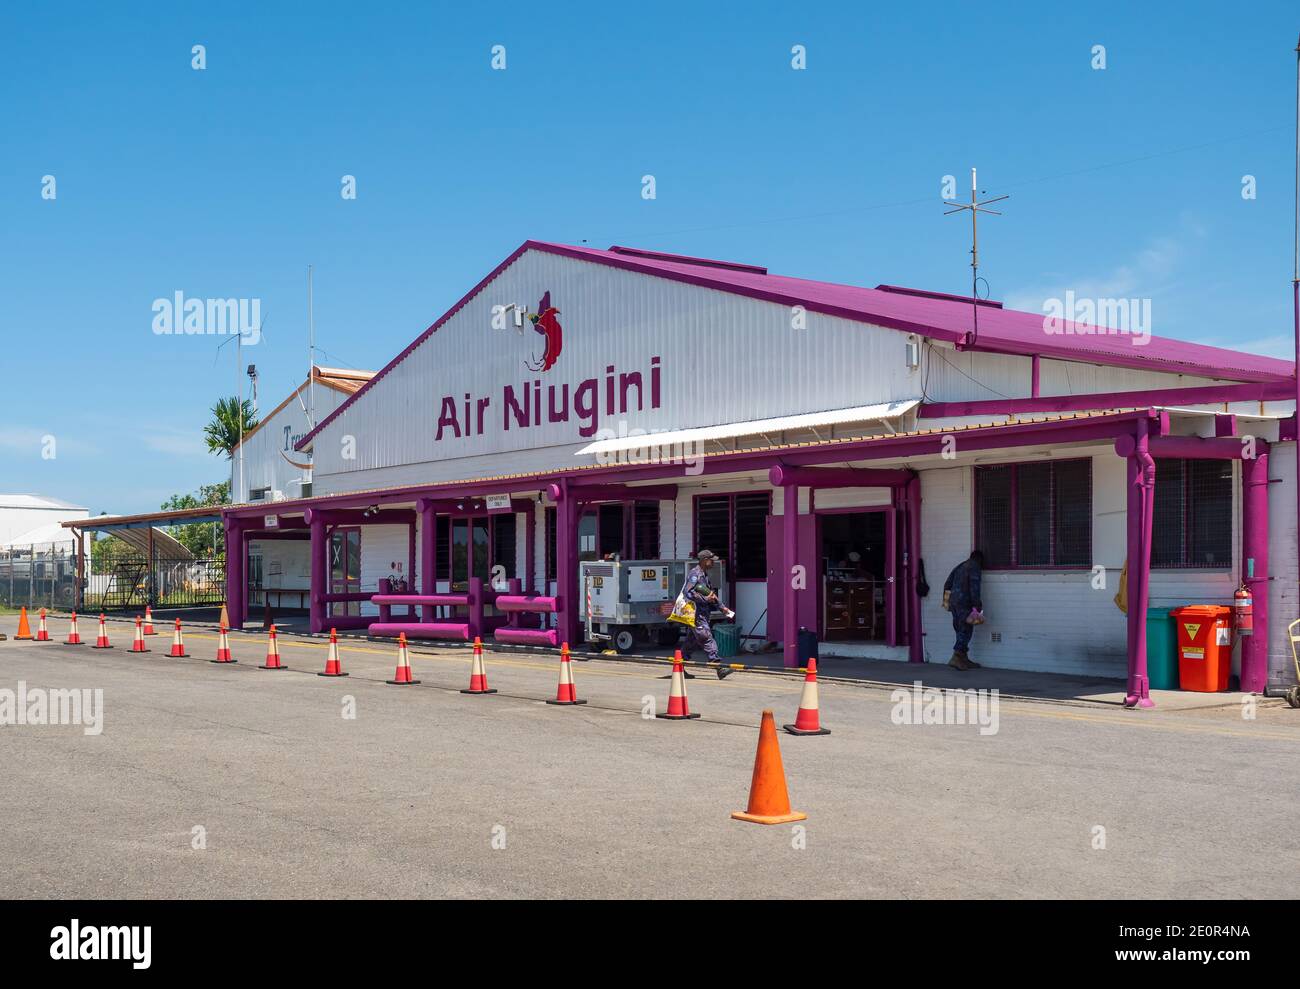 The terminal building at Madang airport in madang, the capital of the Madang province of Papua New Guinea. Stock Photo